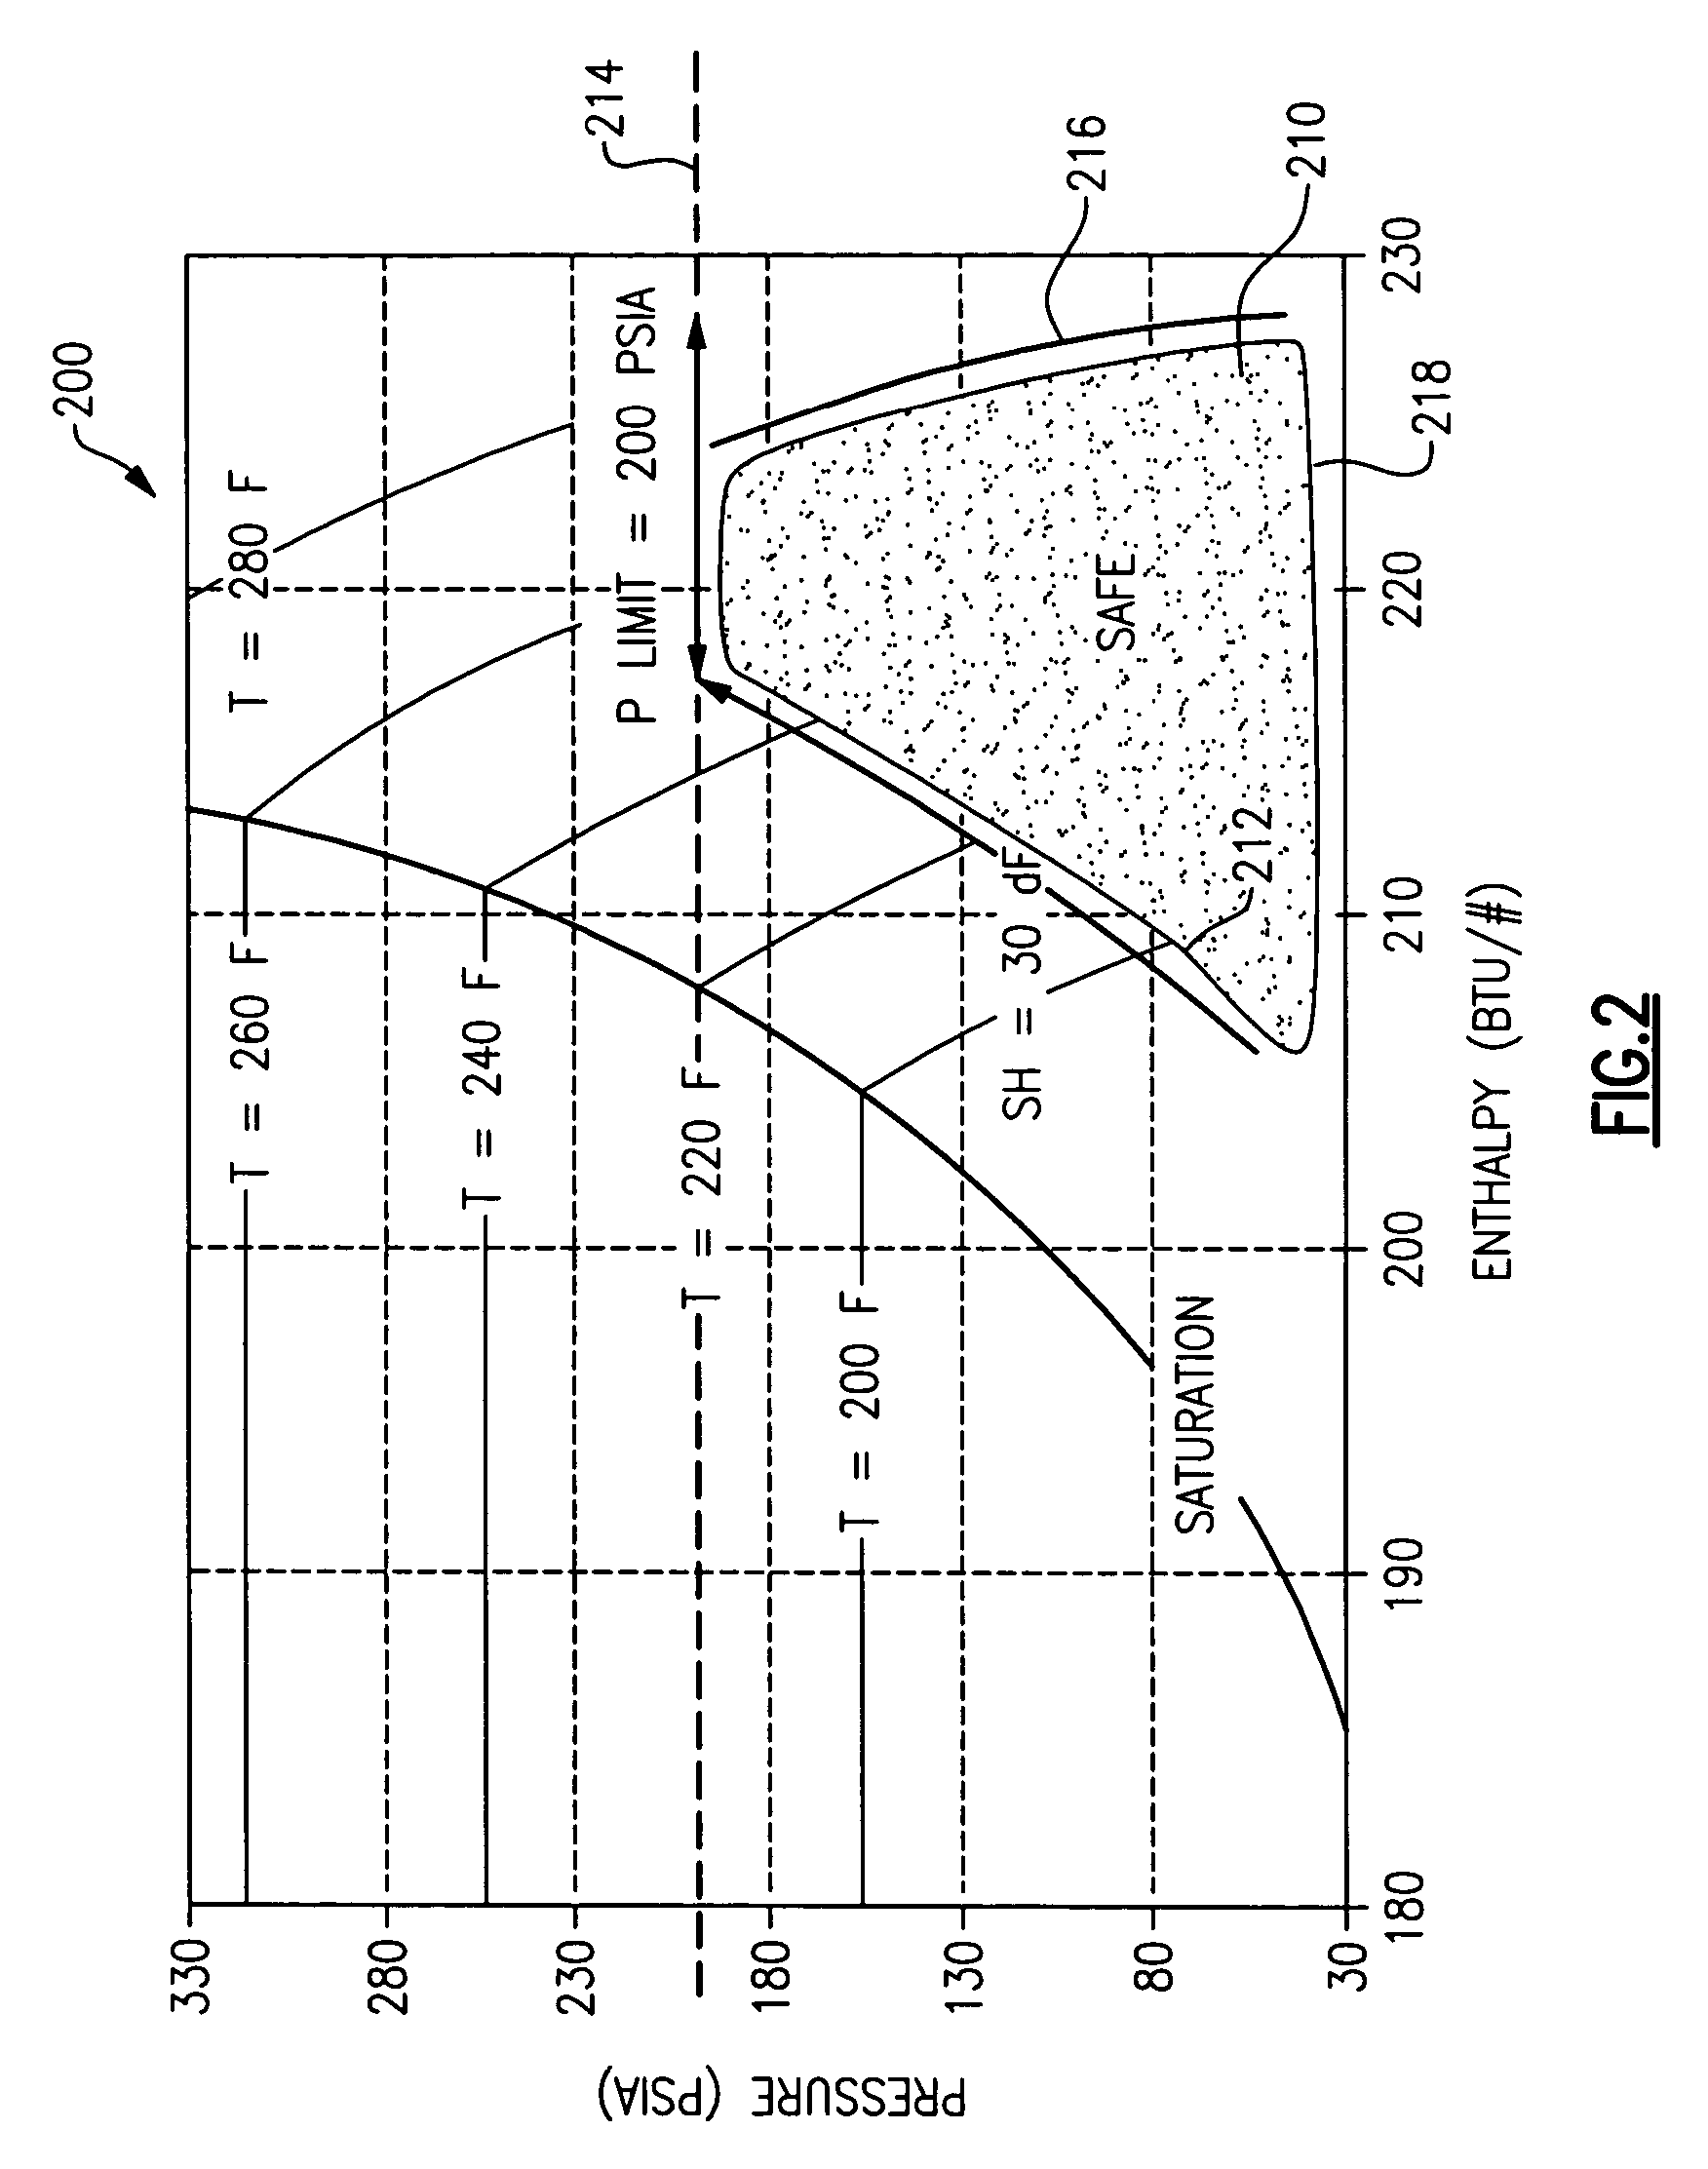 Startup and control methods for an ORC bottoming plant